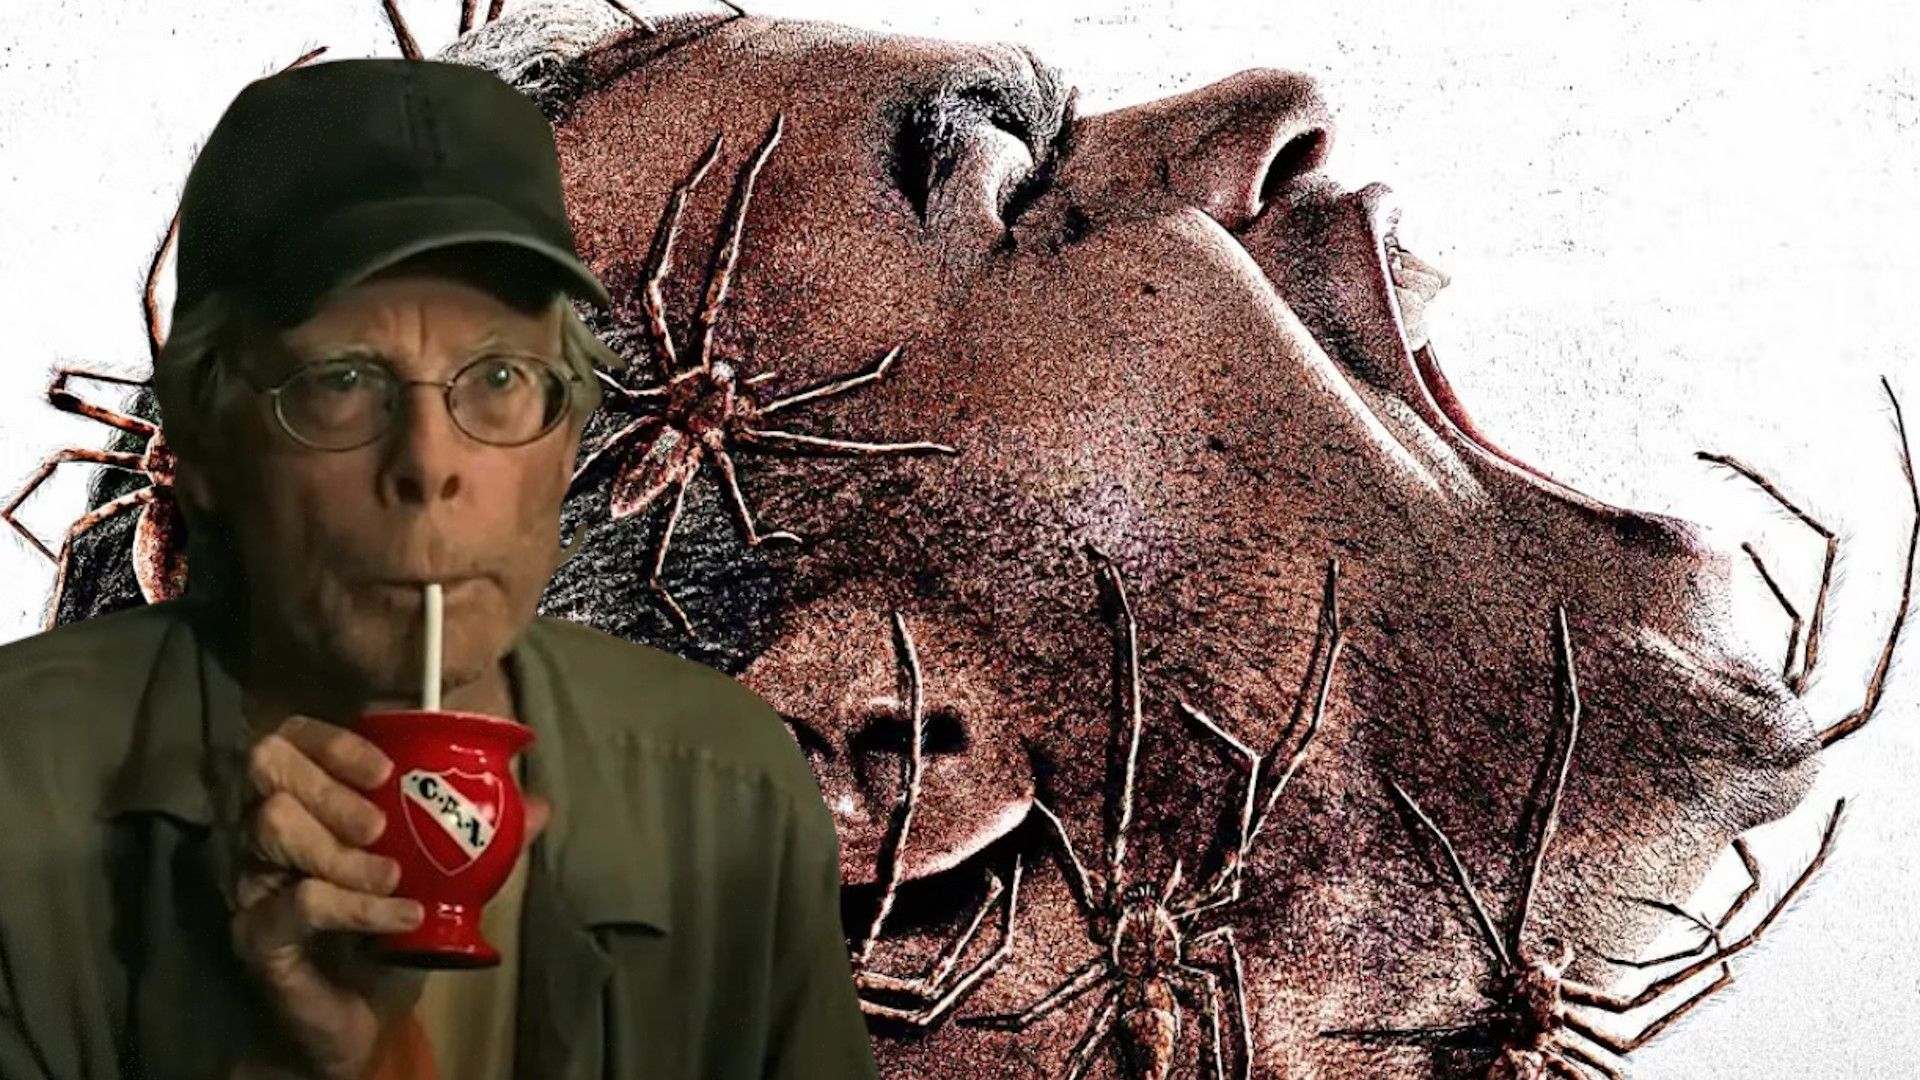 Stephen King sipping a drink over the Infested poster